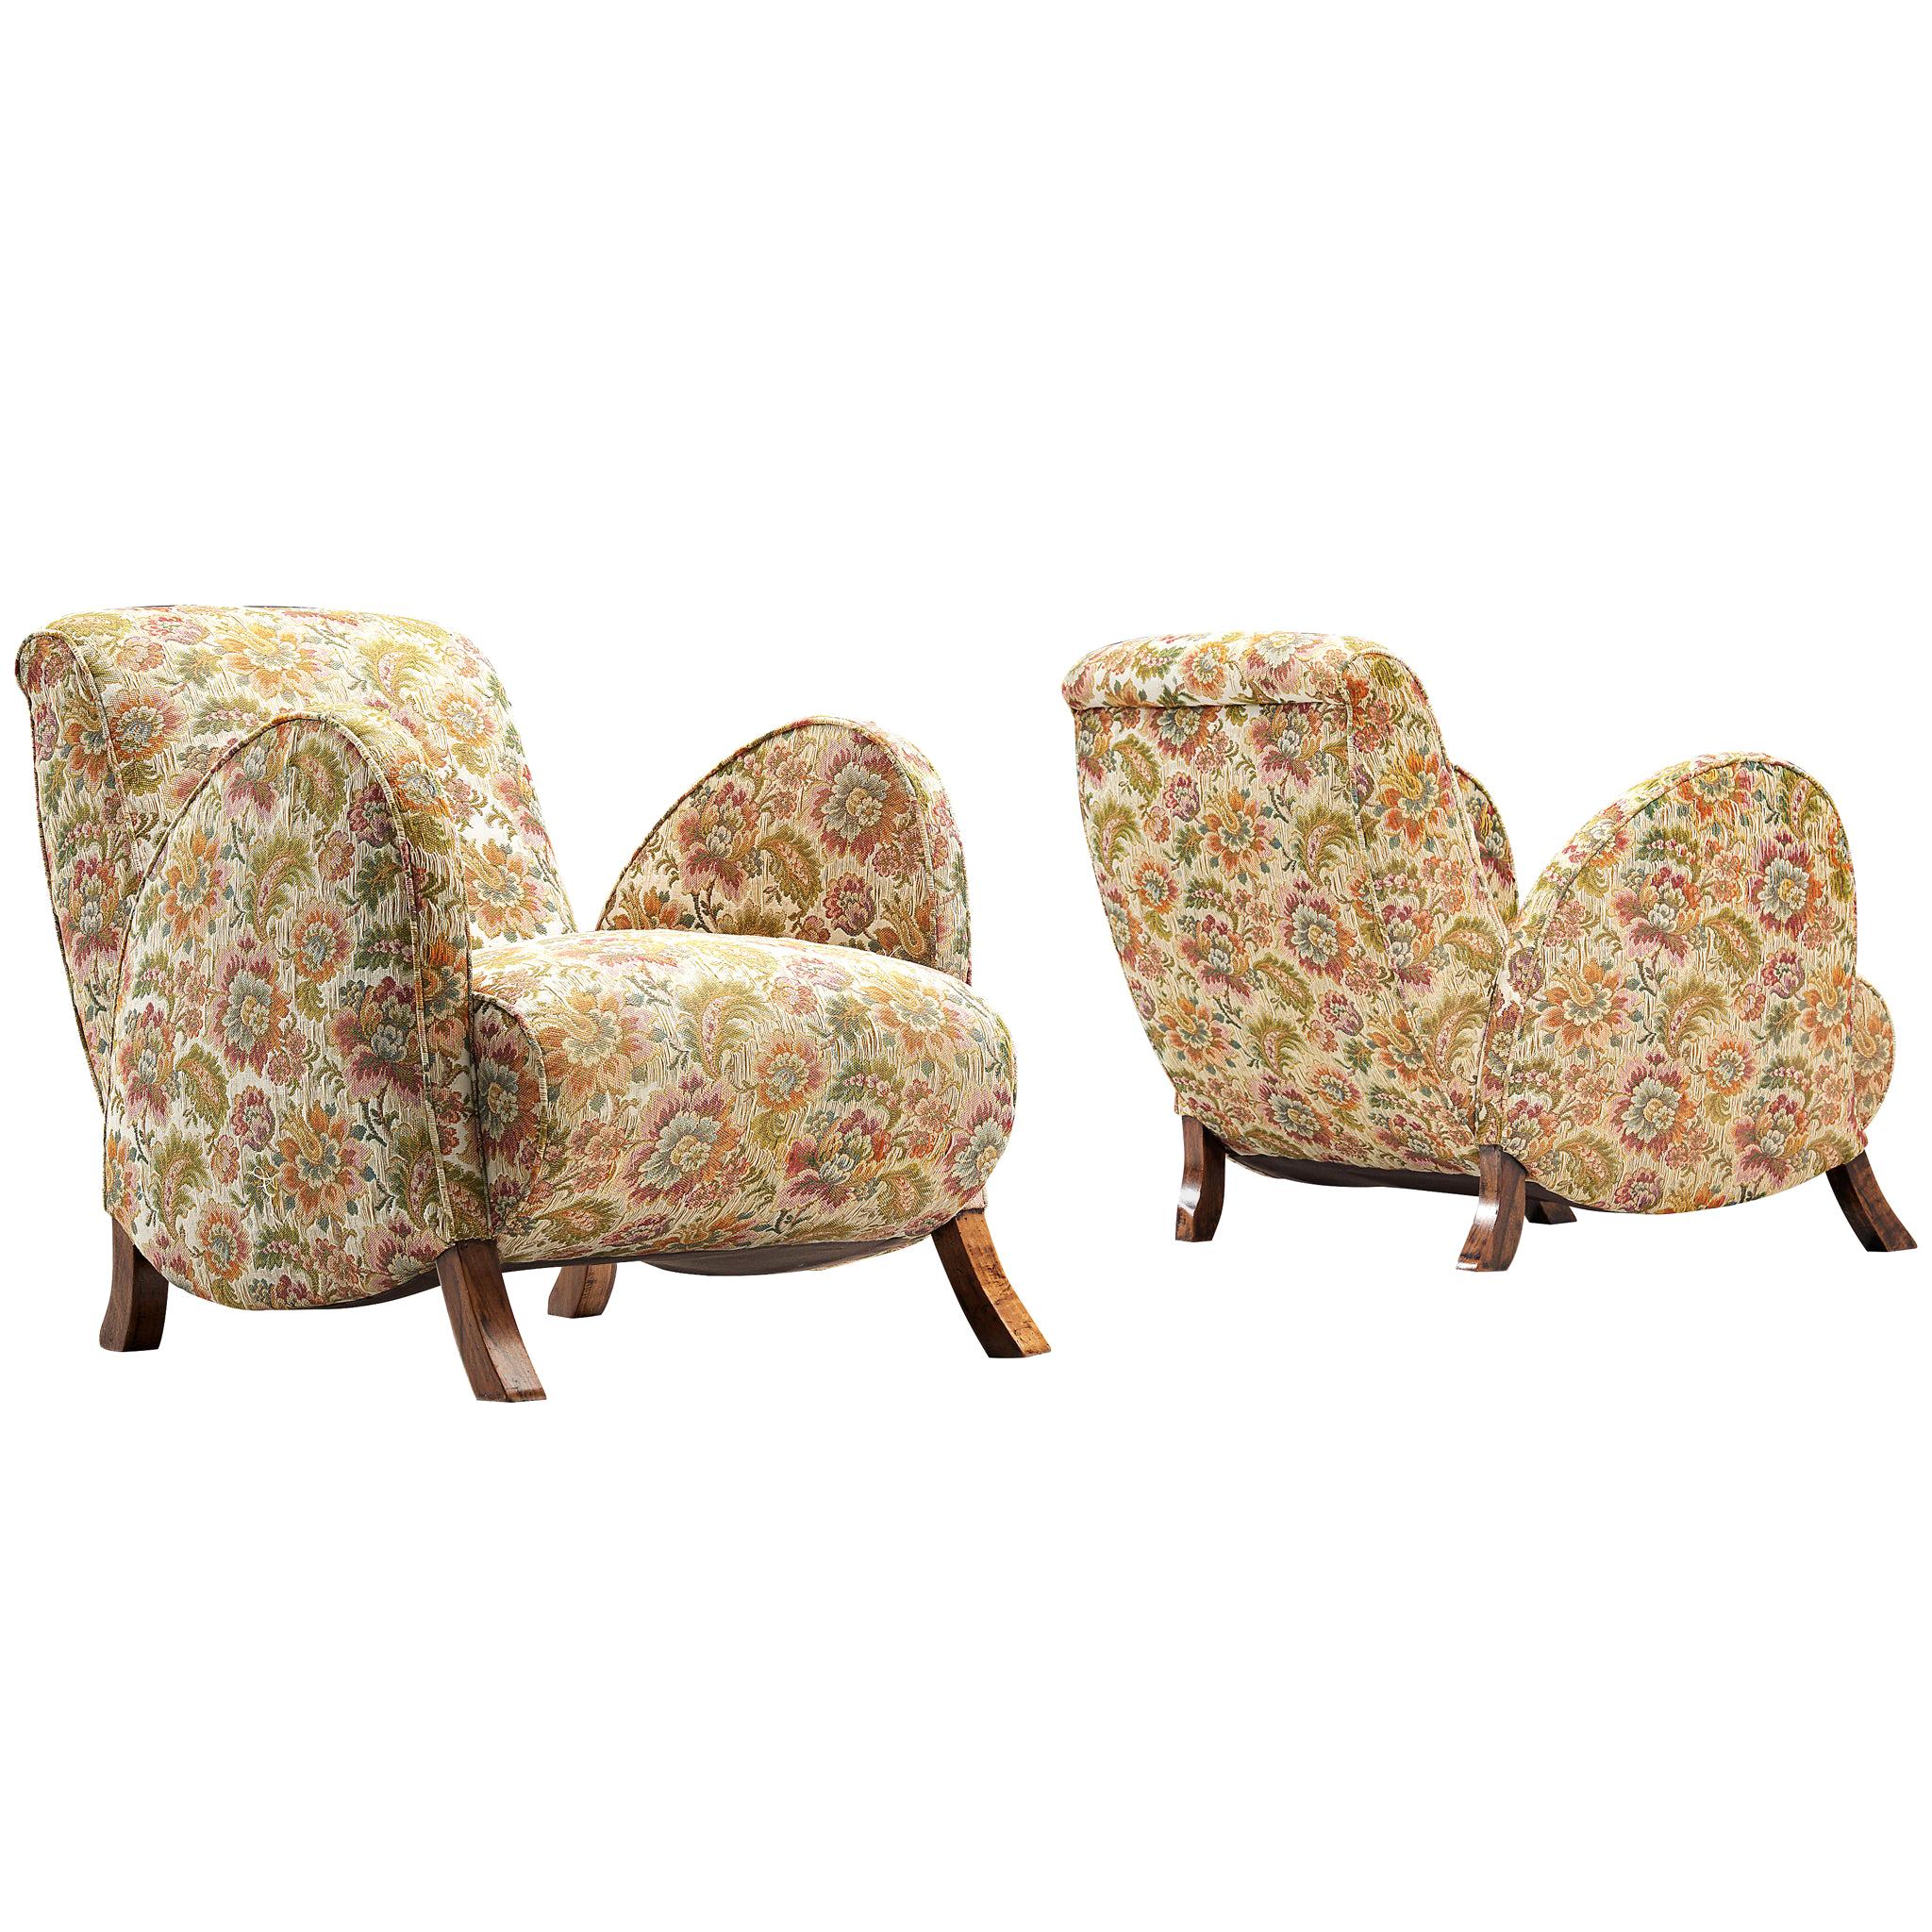 Pair of Italian Curved Armchairs in Floral Upholstery, 1950s